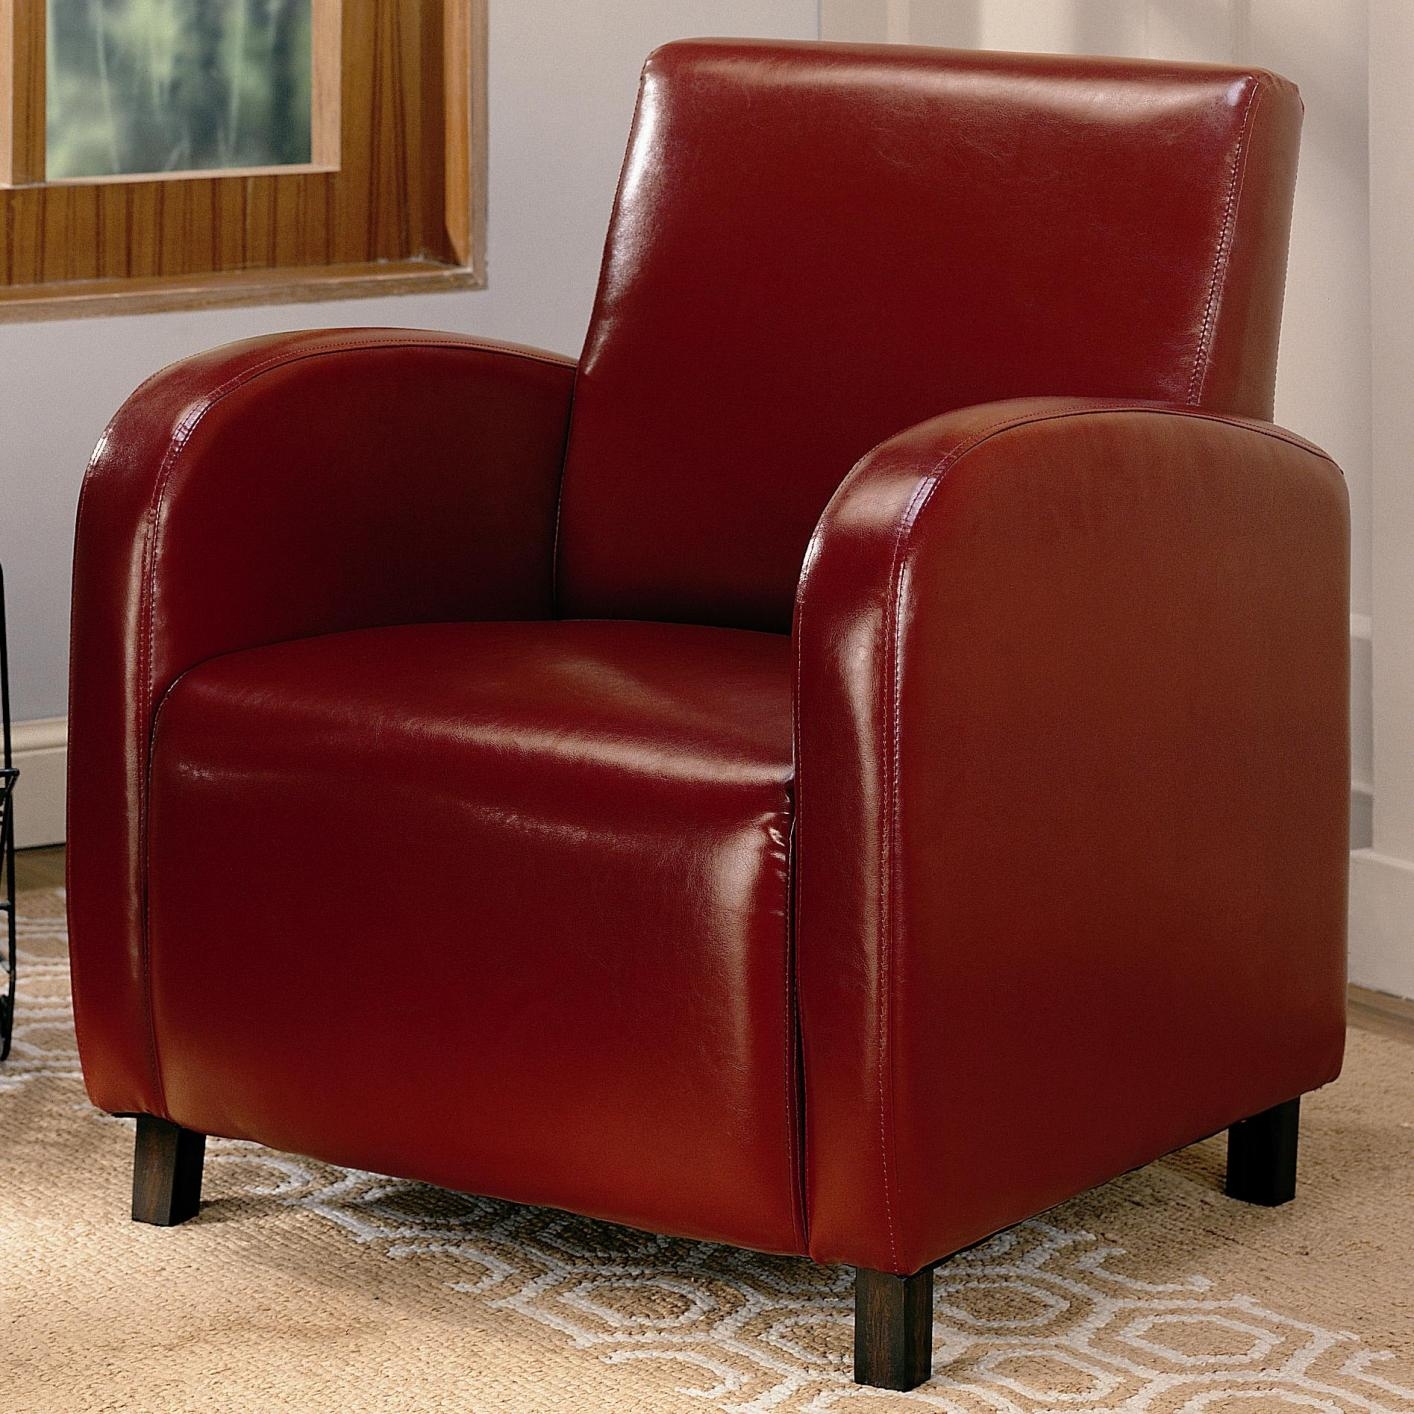 Deep Red Leather-like Accent Chair, Small Office Waiting Area Chair